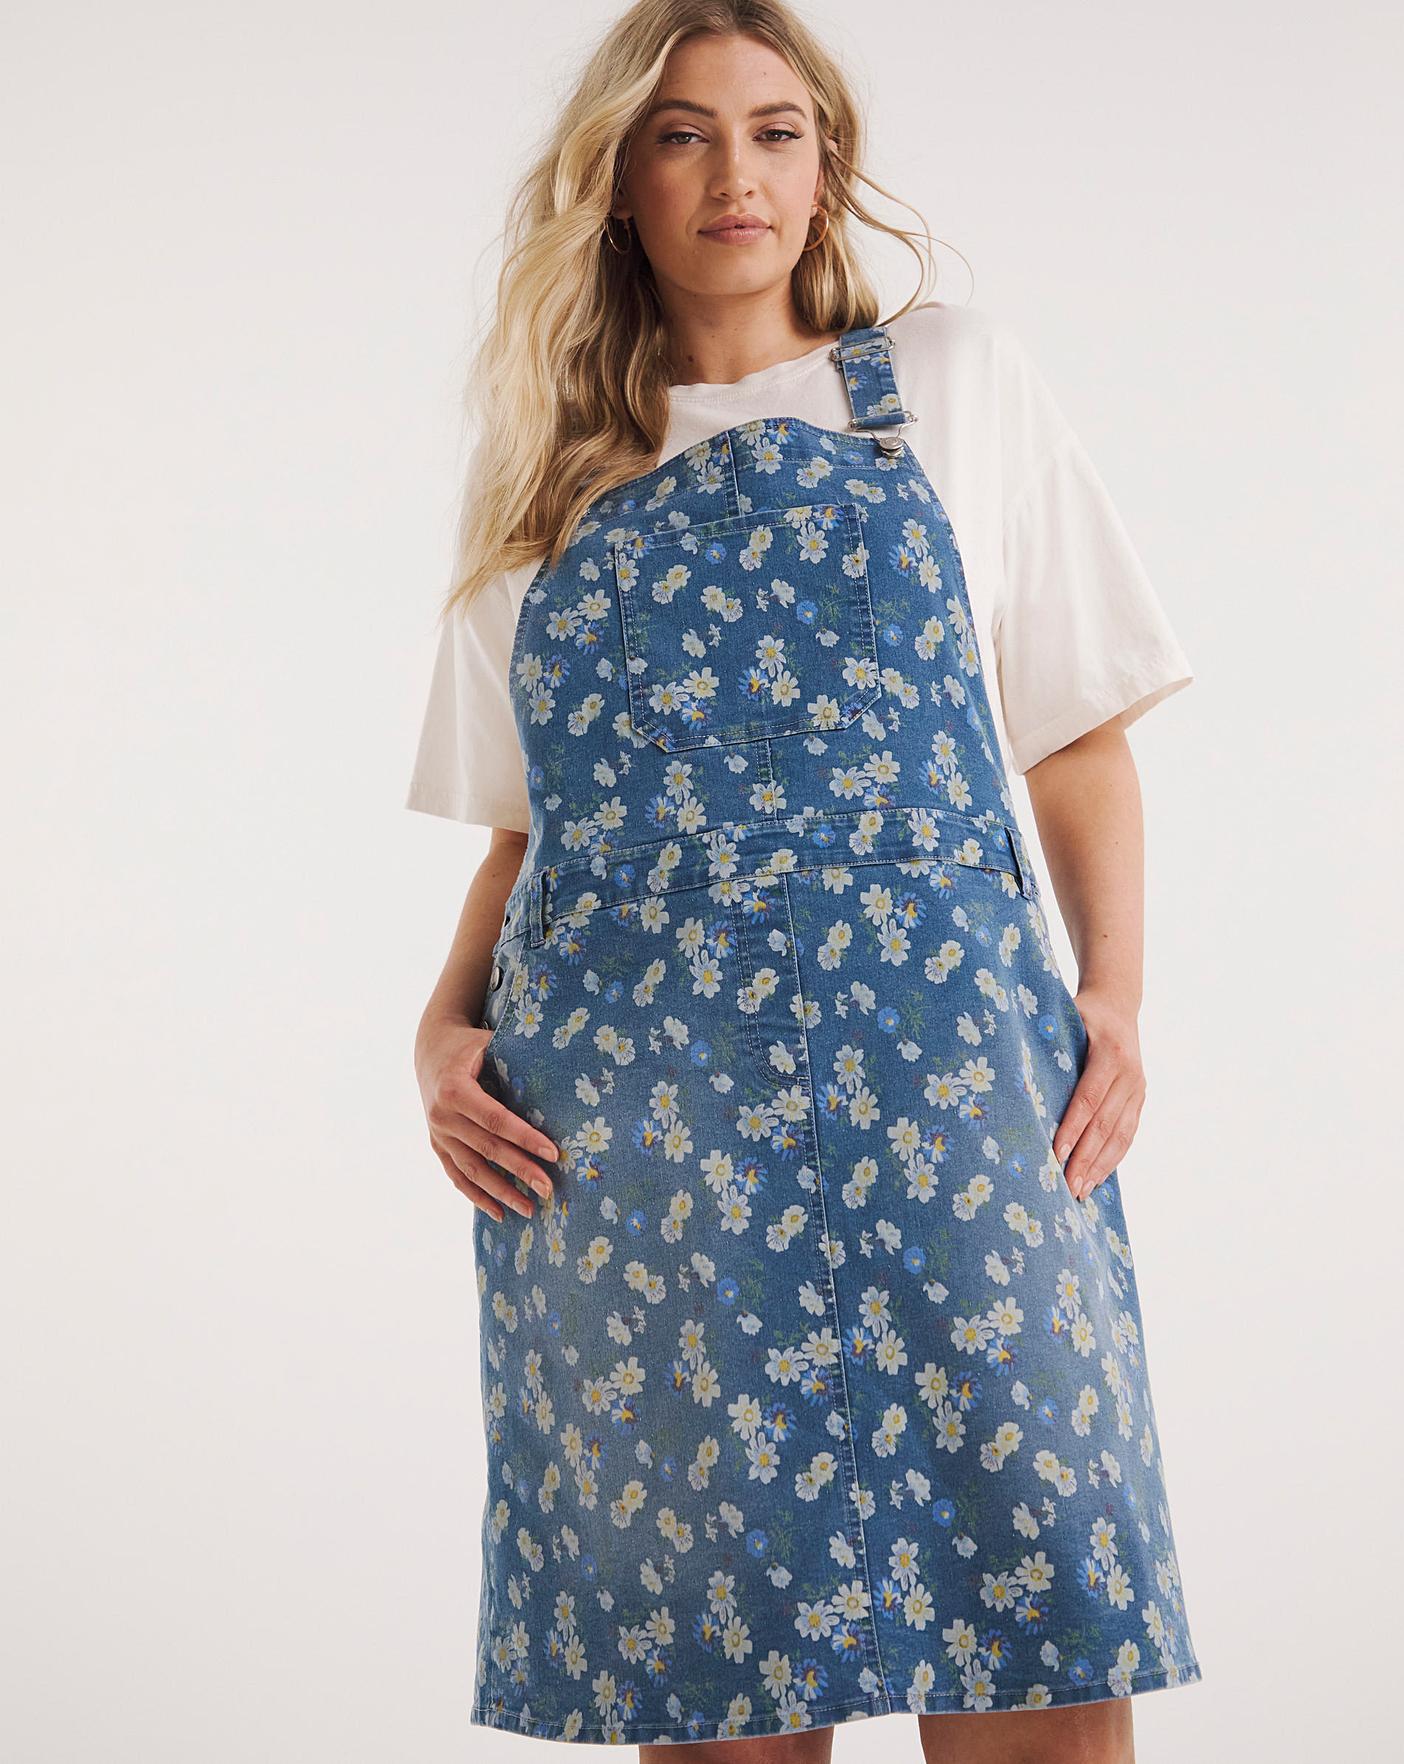 These 25+ Maternity Dresses Are the Perfect Choice for Spring | Trendy  maternity fashion, Denim overall dress, Maternity dresses